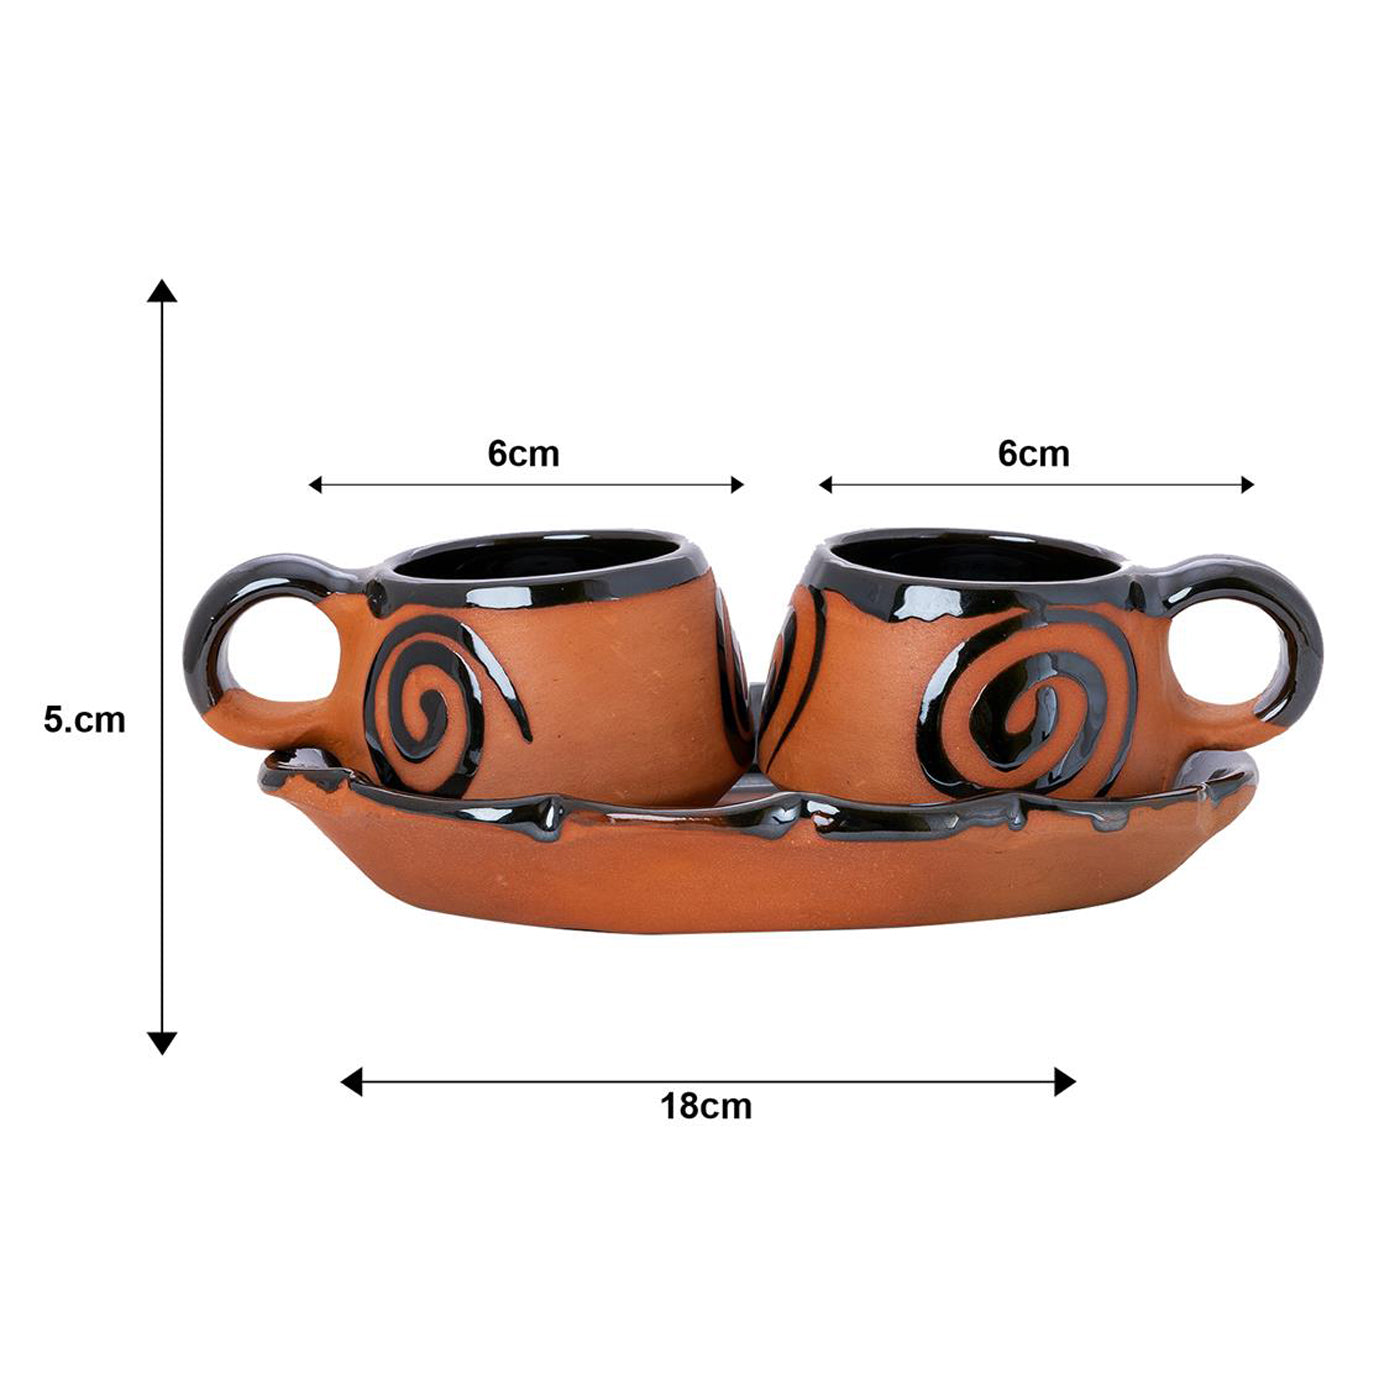 Terracotta Floral Cup Set Artistic Home Decor and Kitchenware